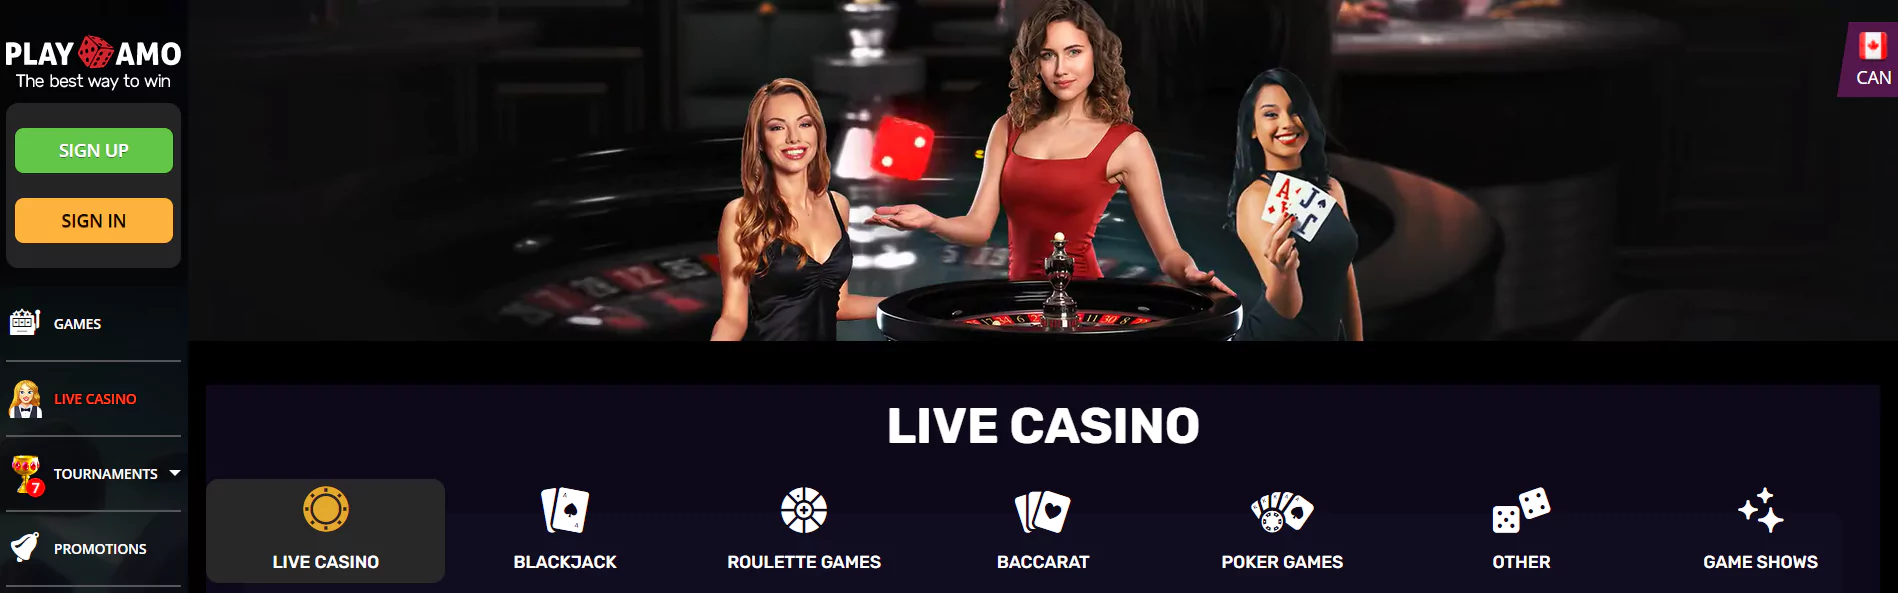 Screenshot of Play Amo - Online Casino with Live Dealers